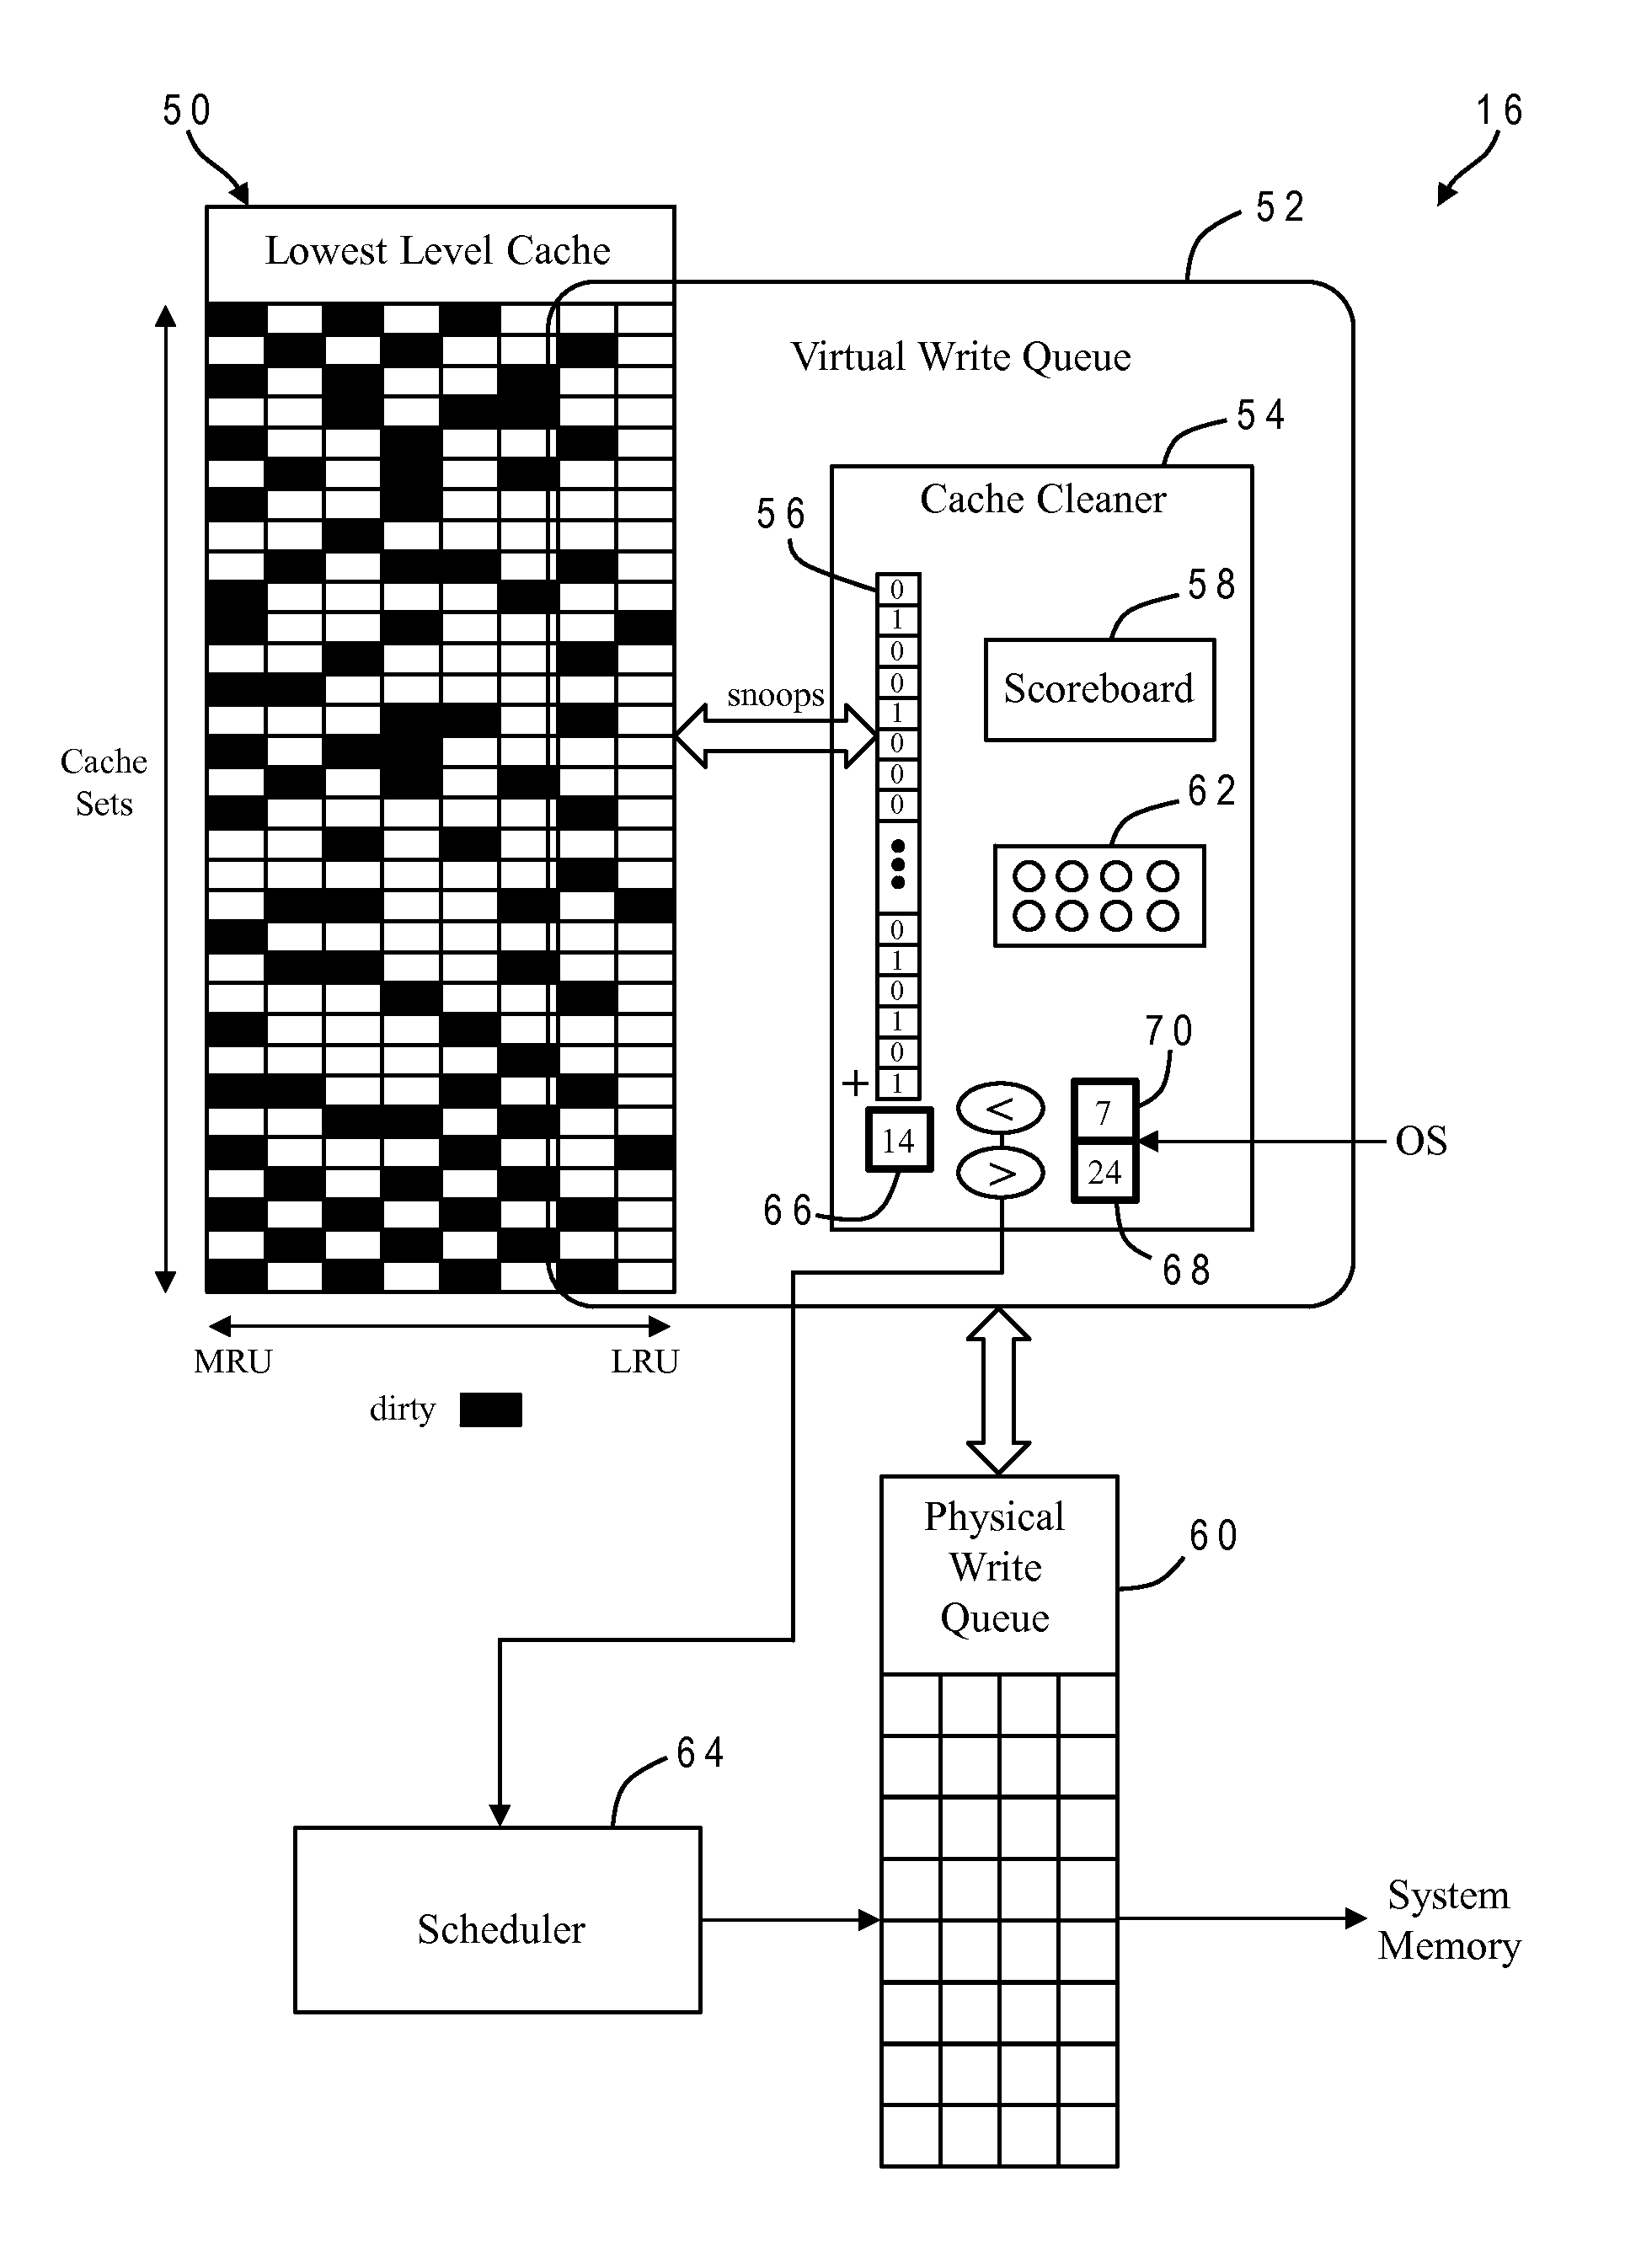 Dynamic write priority based on virtual write queue high water mark for set associative cache using cache cleaner when modified sets exceed threshold